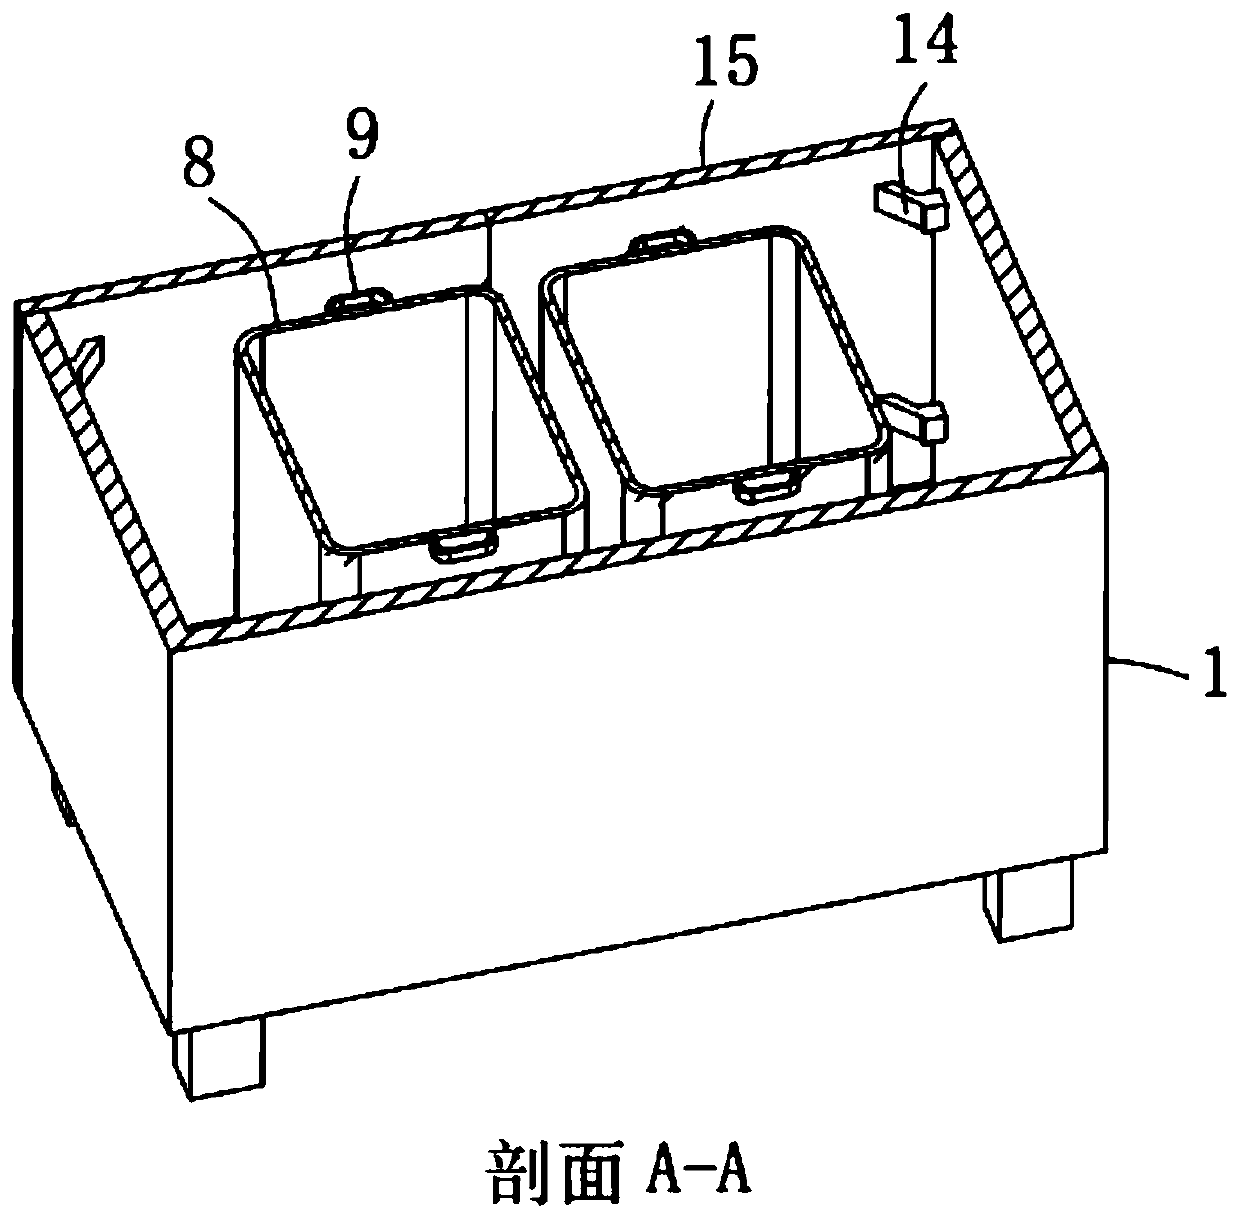 Garbage collecting device